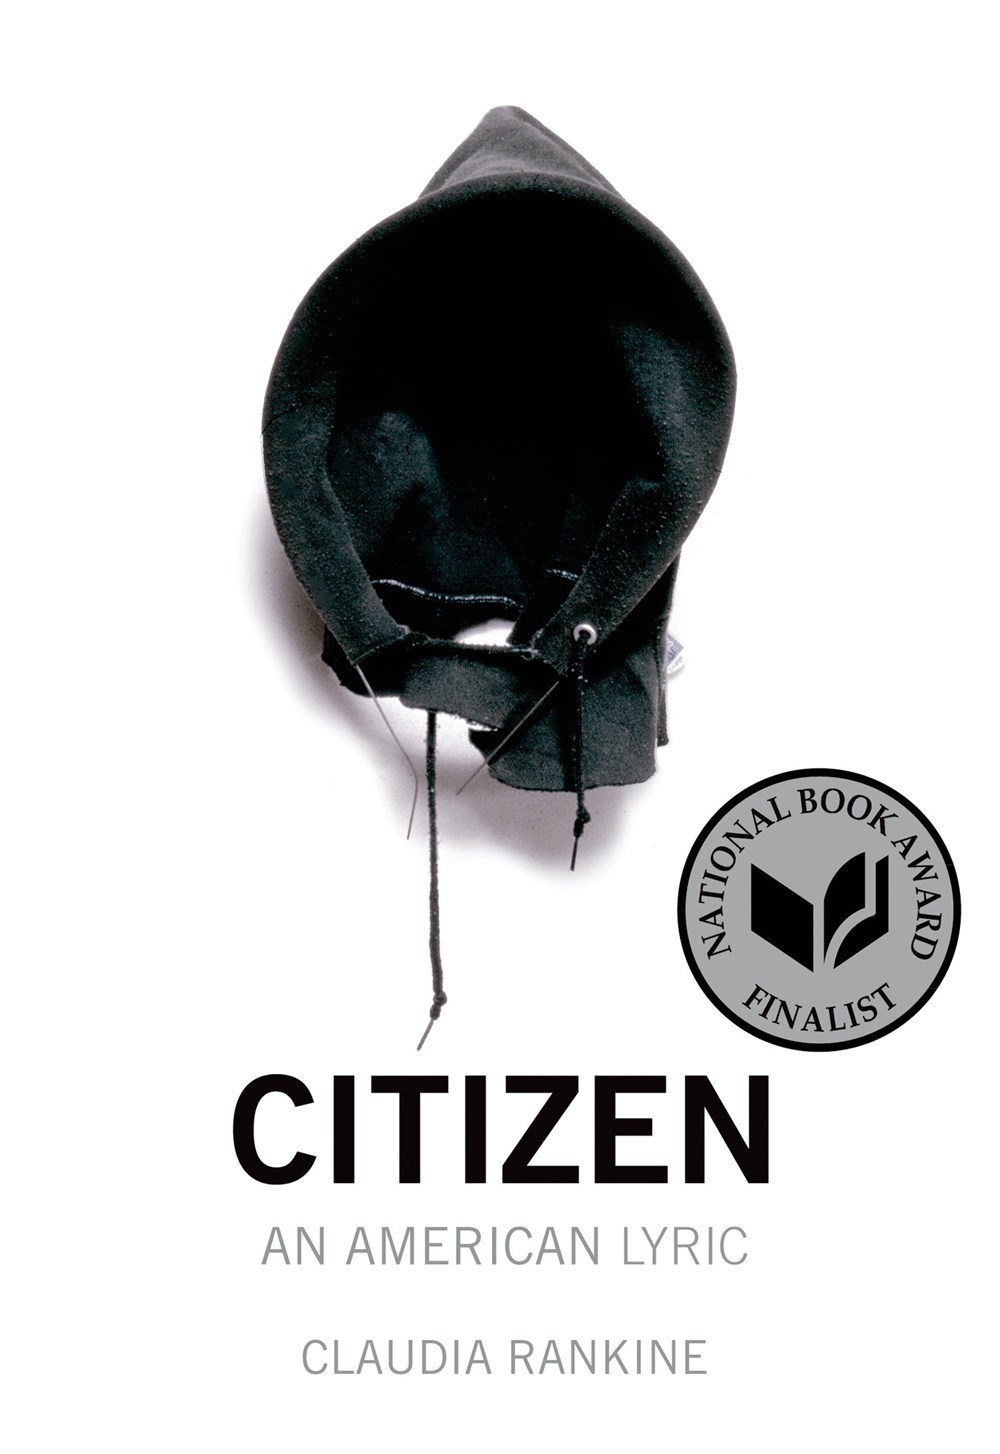 Image for "Citizen: An American Lyric"